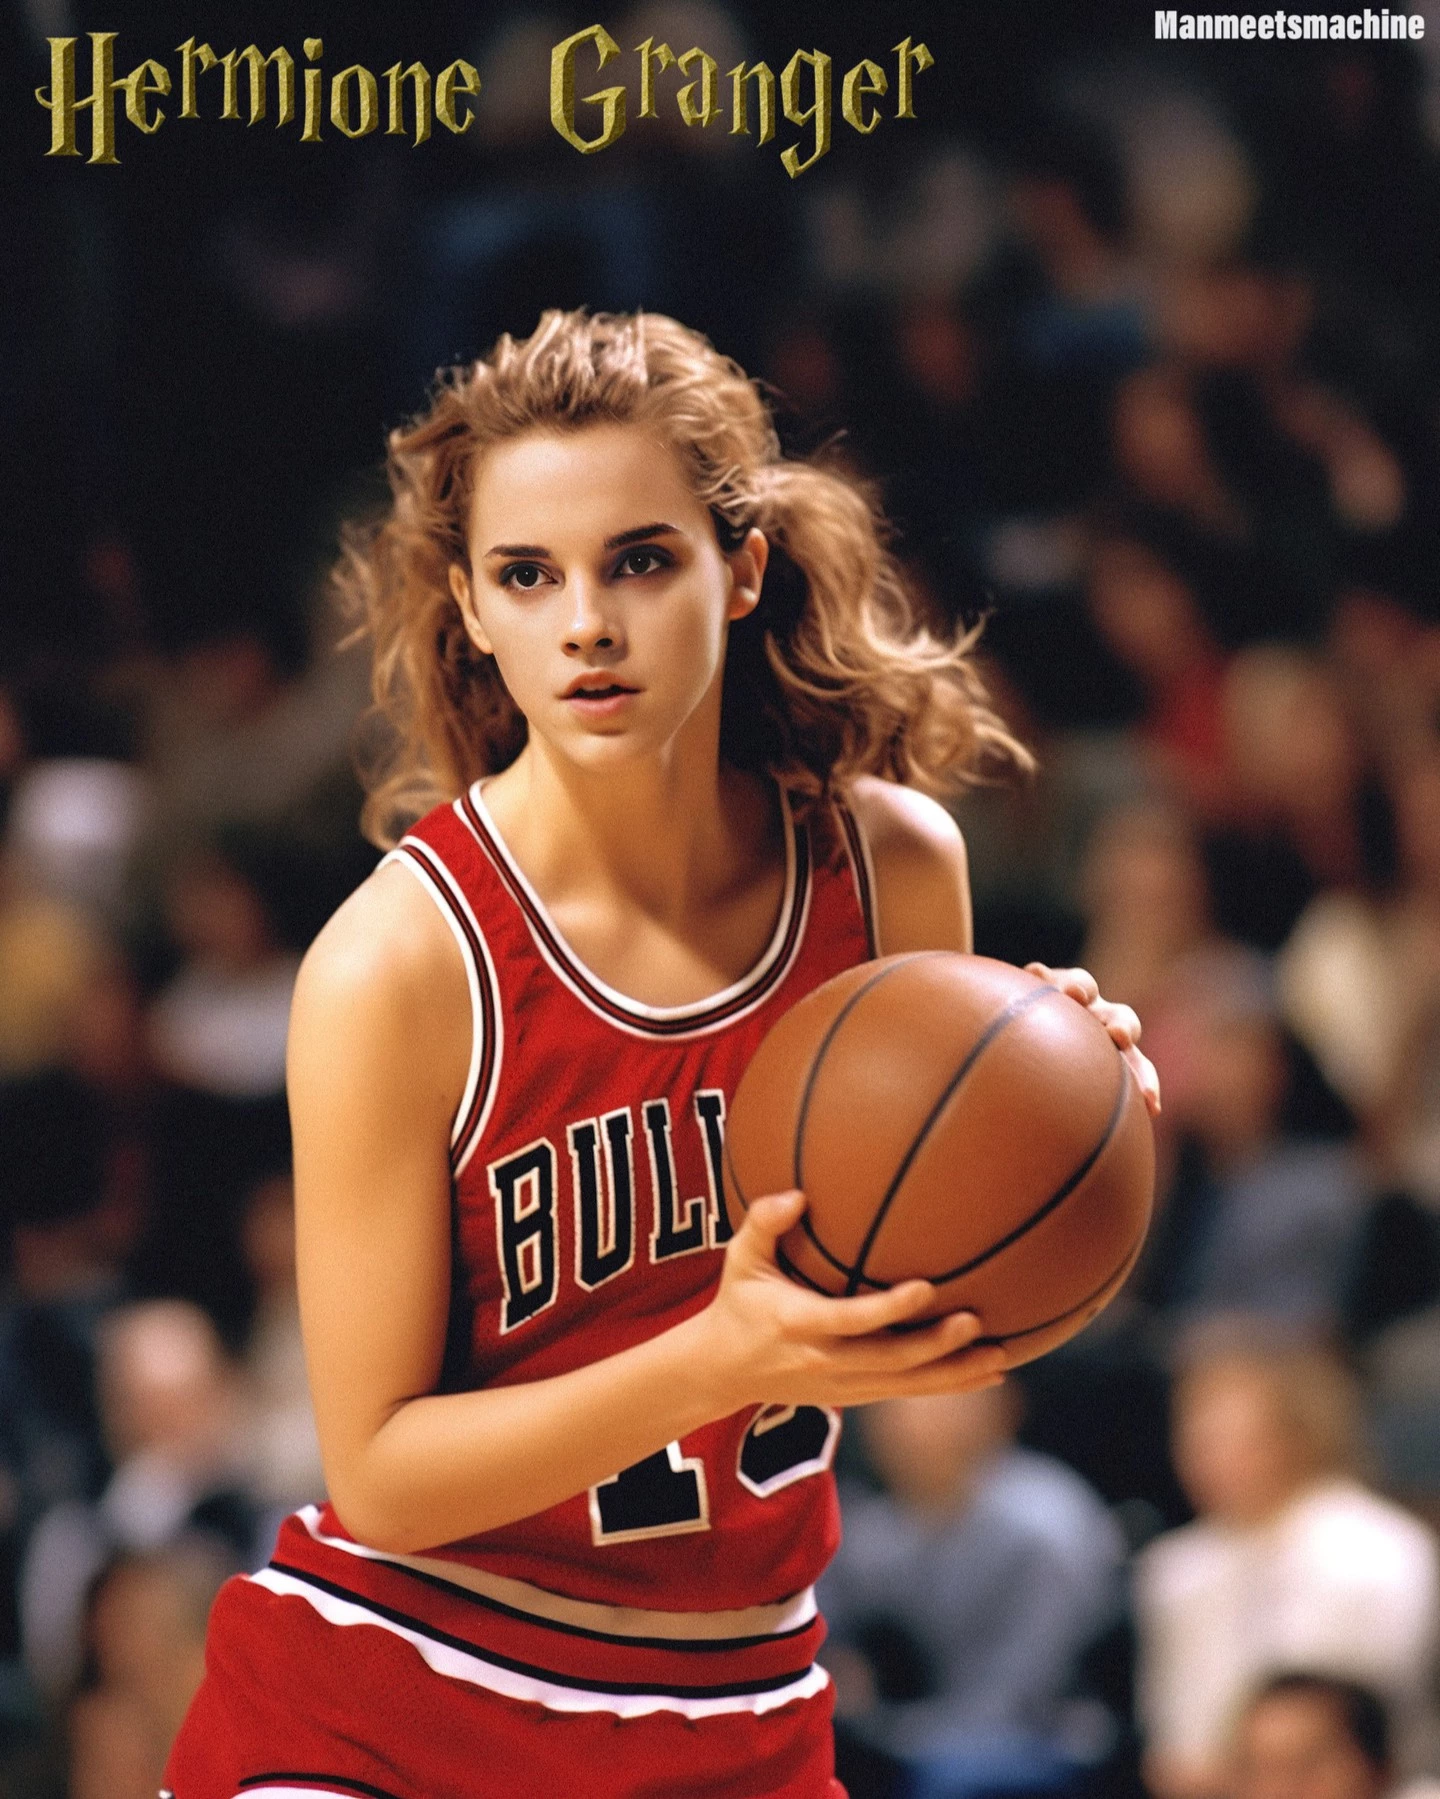 With Her Beauty, Hermione Granger Is Going To Draw Some Look In The Chicago Bulls Uniform